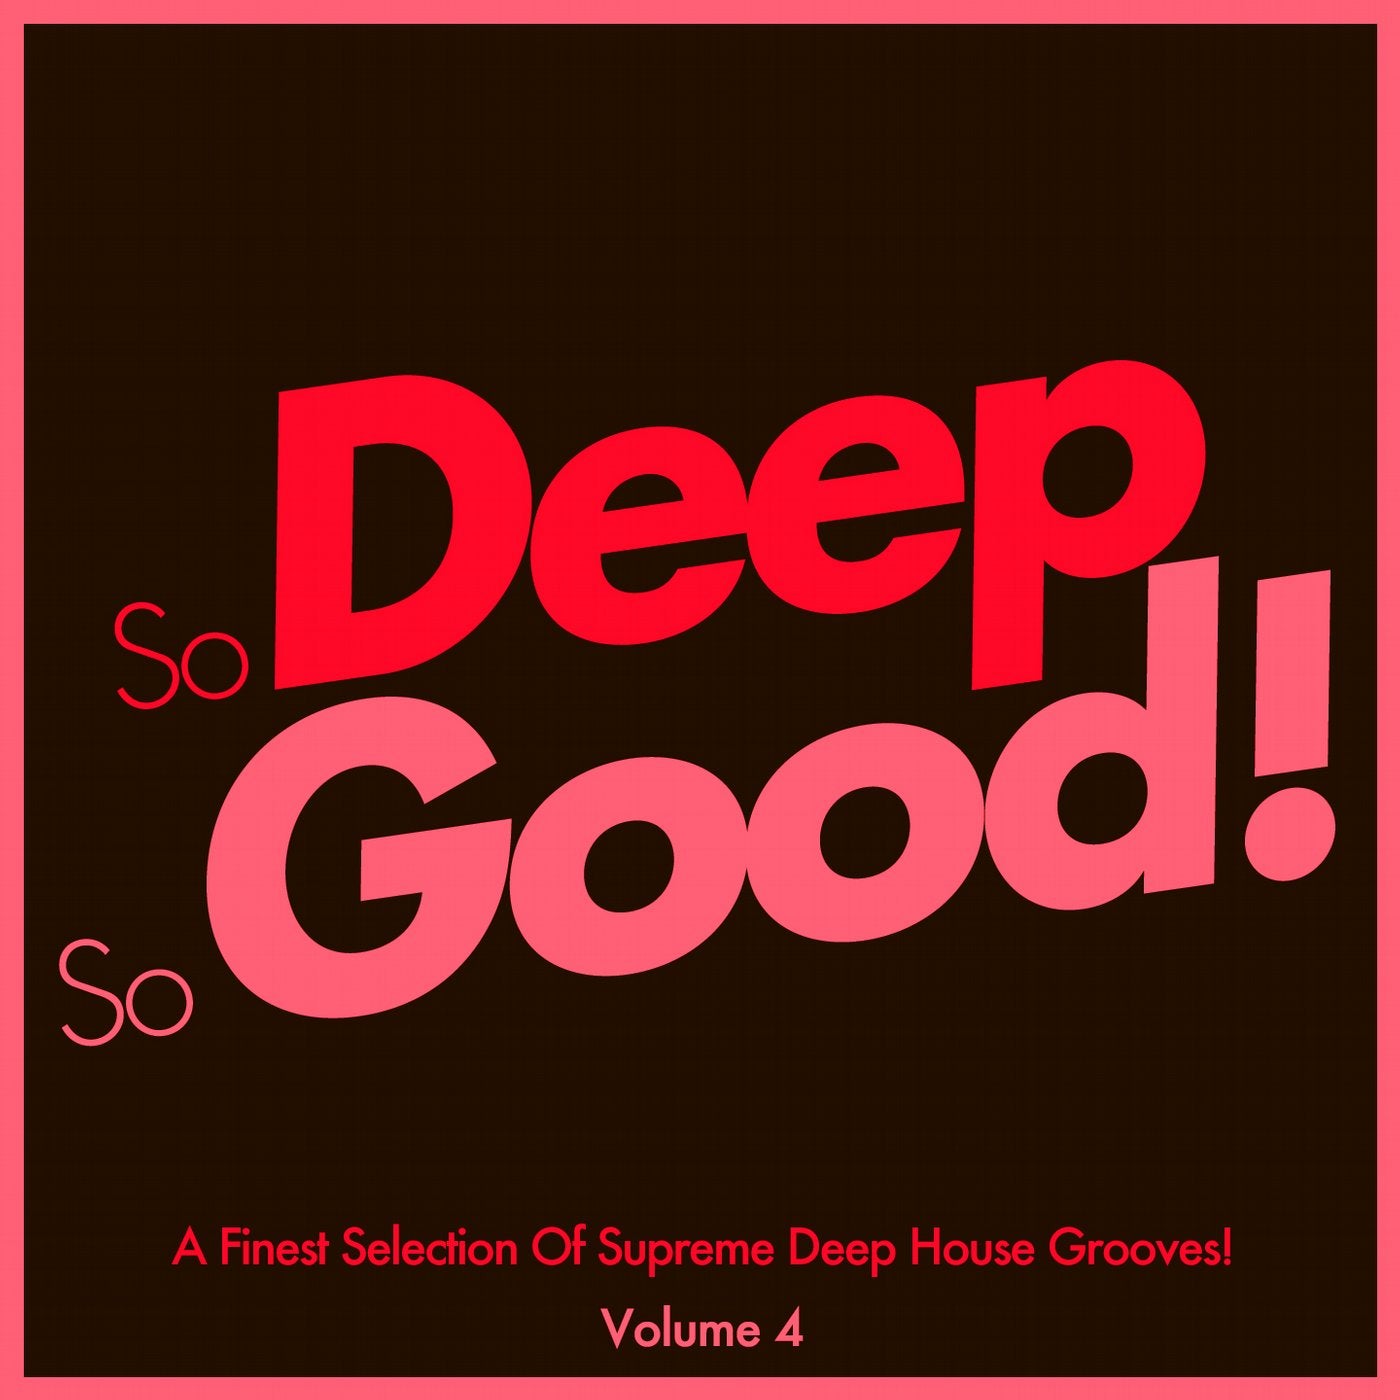 So Deep, so Good! - A Finest Selection of Supreme Deep House Grooves-, Vol. 4